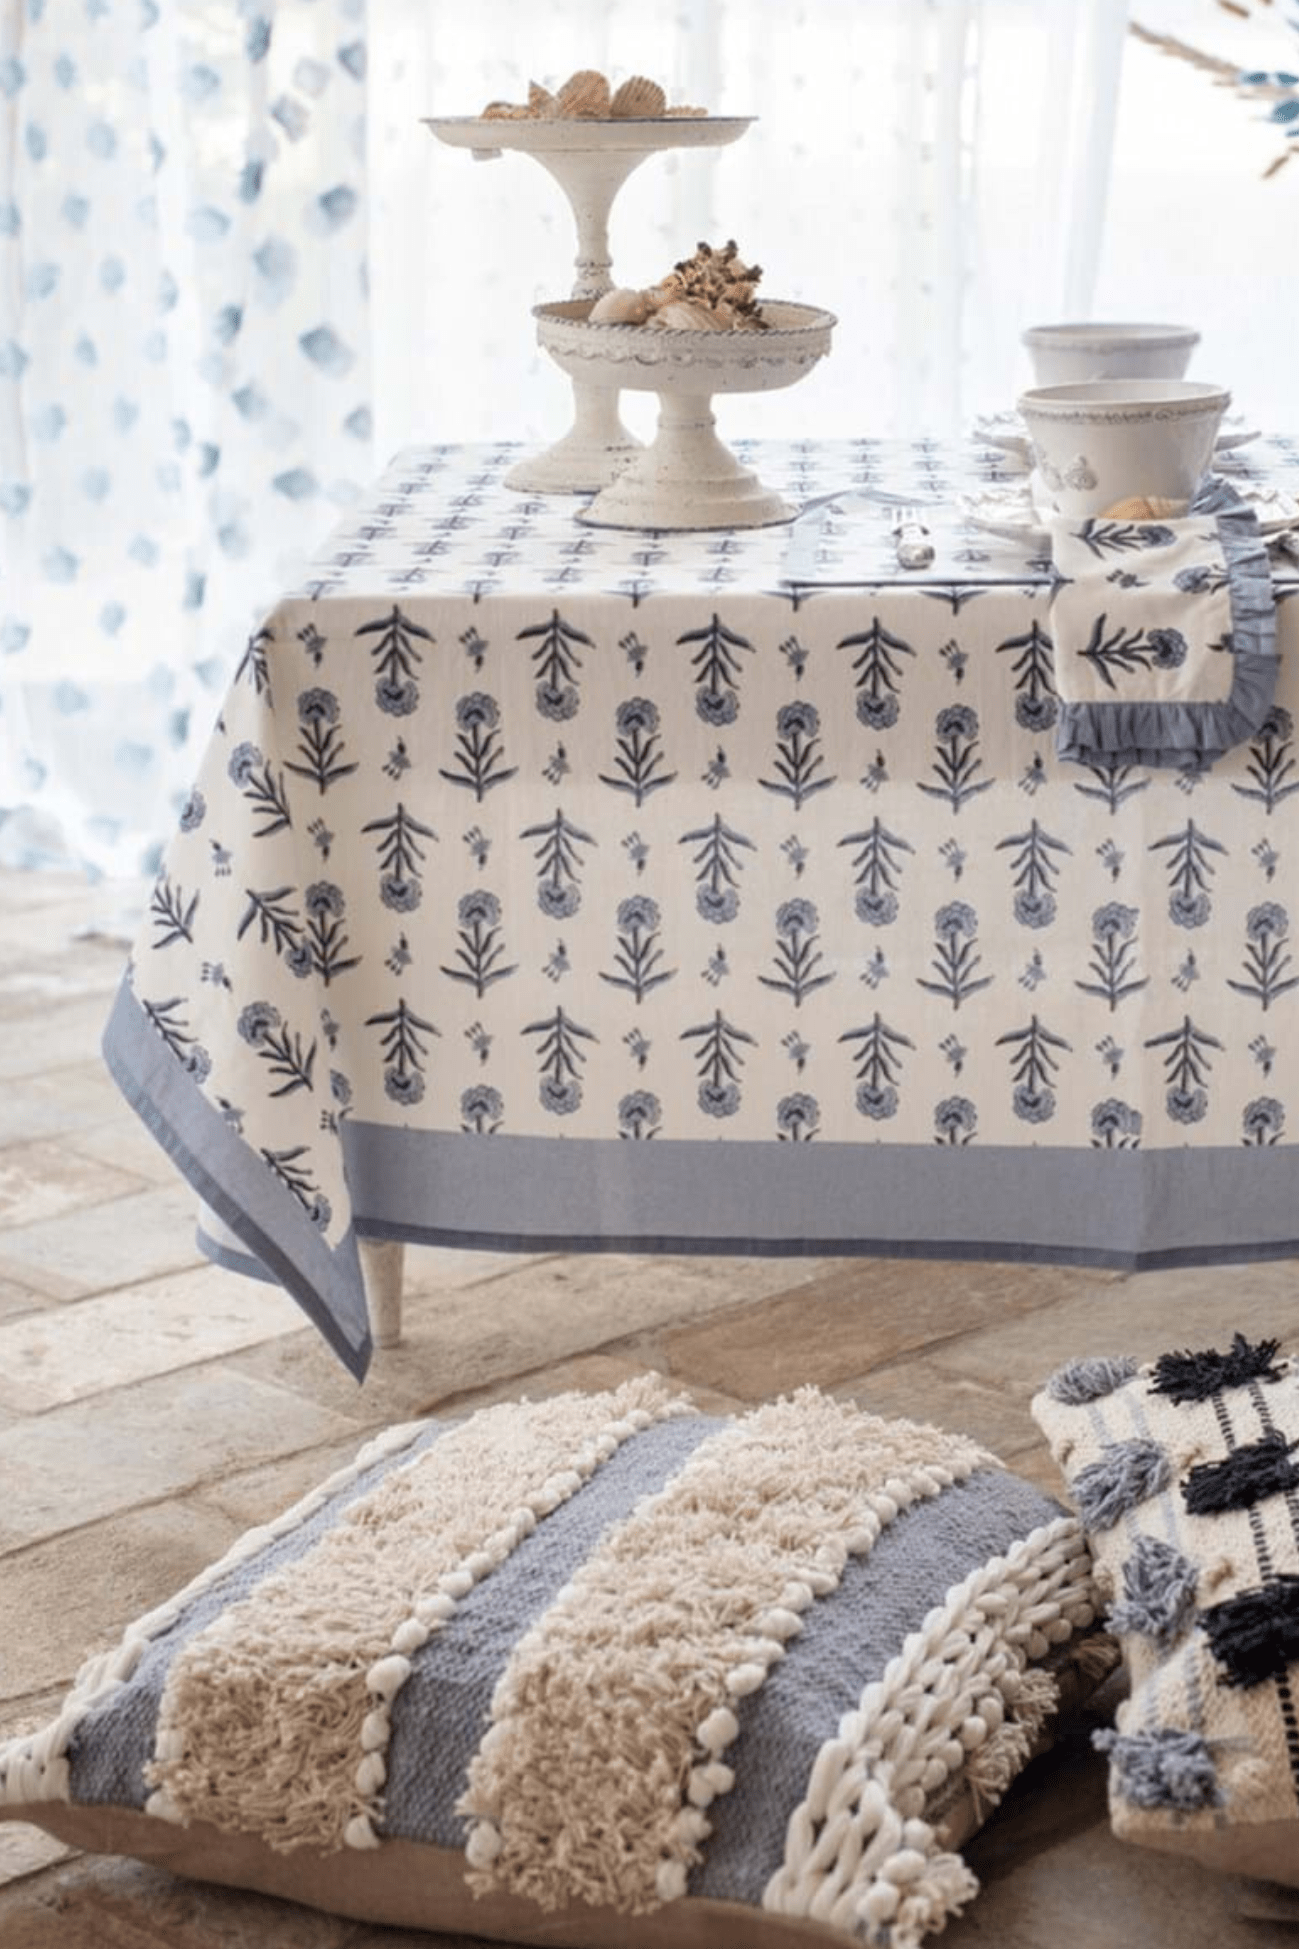 Blanc MariClo' Eclectic Day Eclectic Day - Cuscino arredo imbottito con pompons